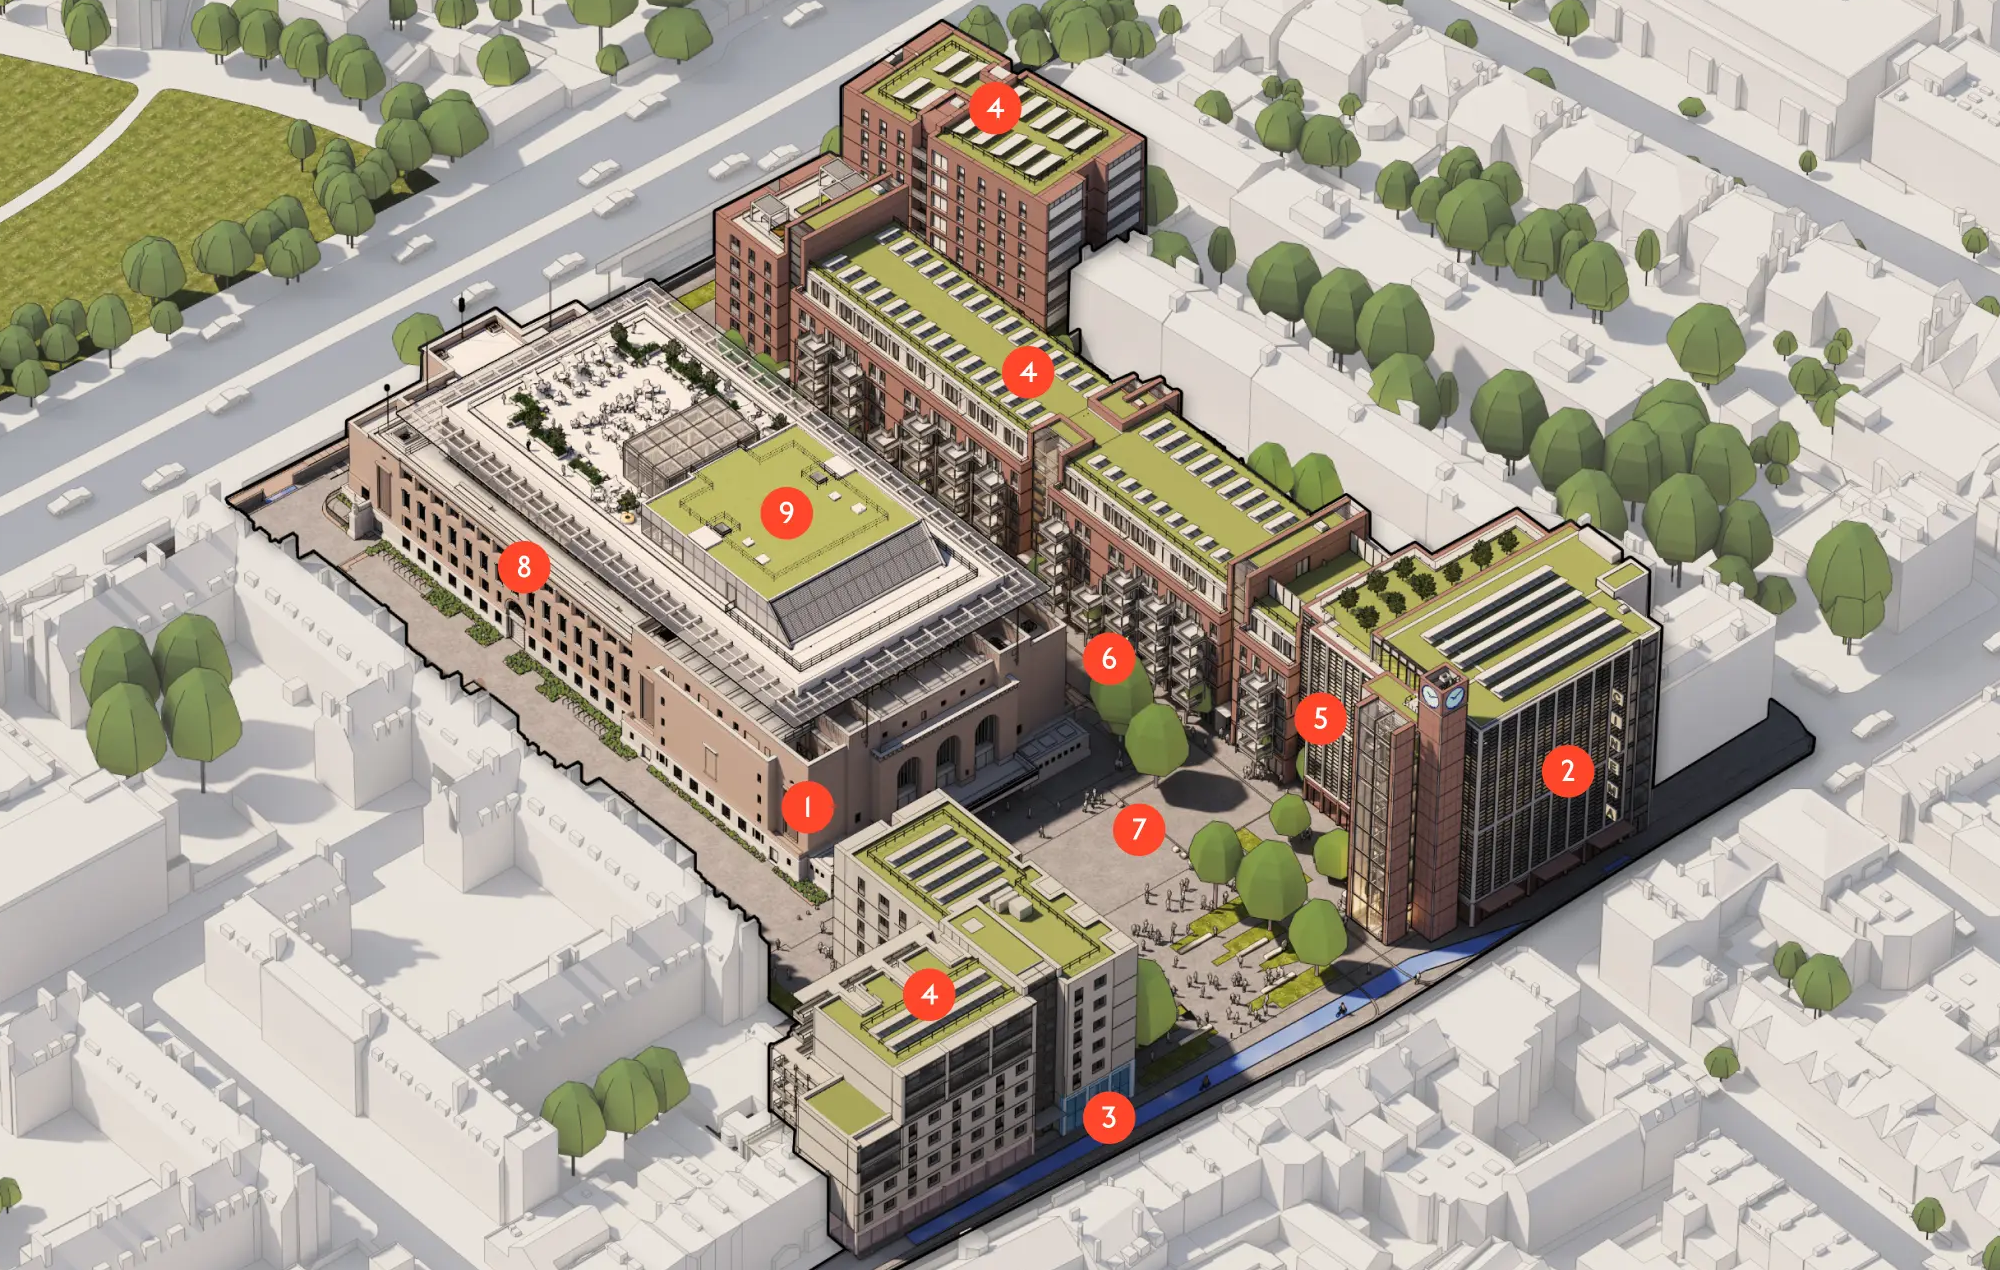 Architect’s rendering of the Civic Campus map, with important features marked out 1 to 9. The list can be found in the text separately.